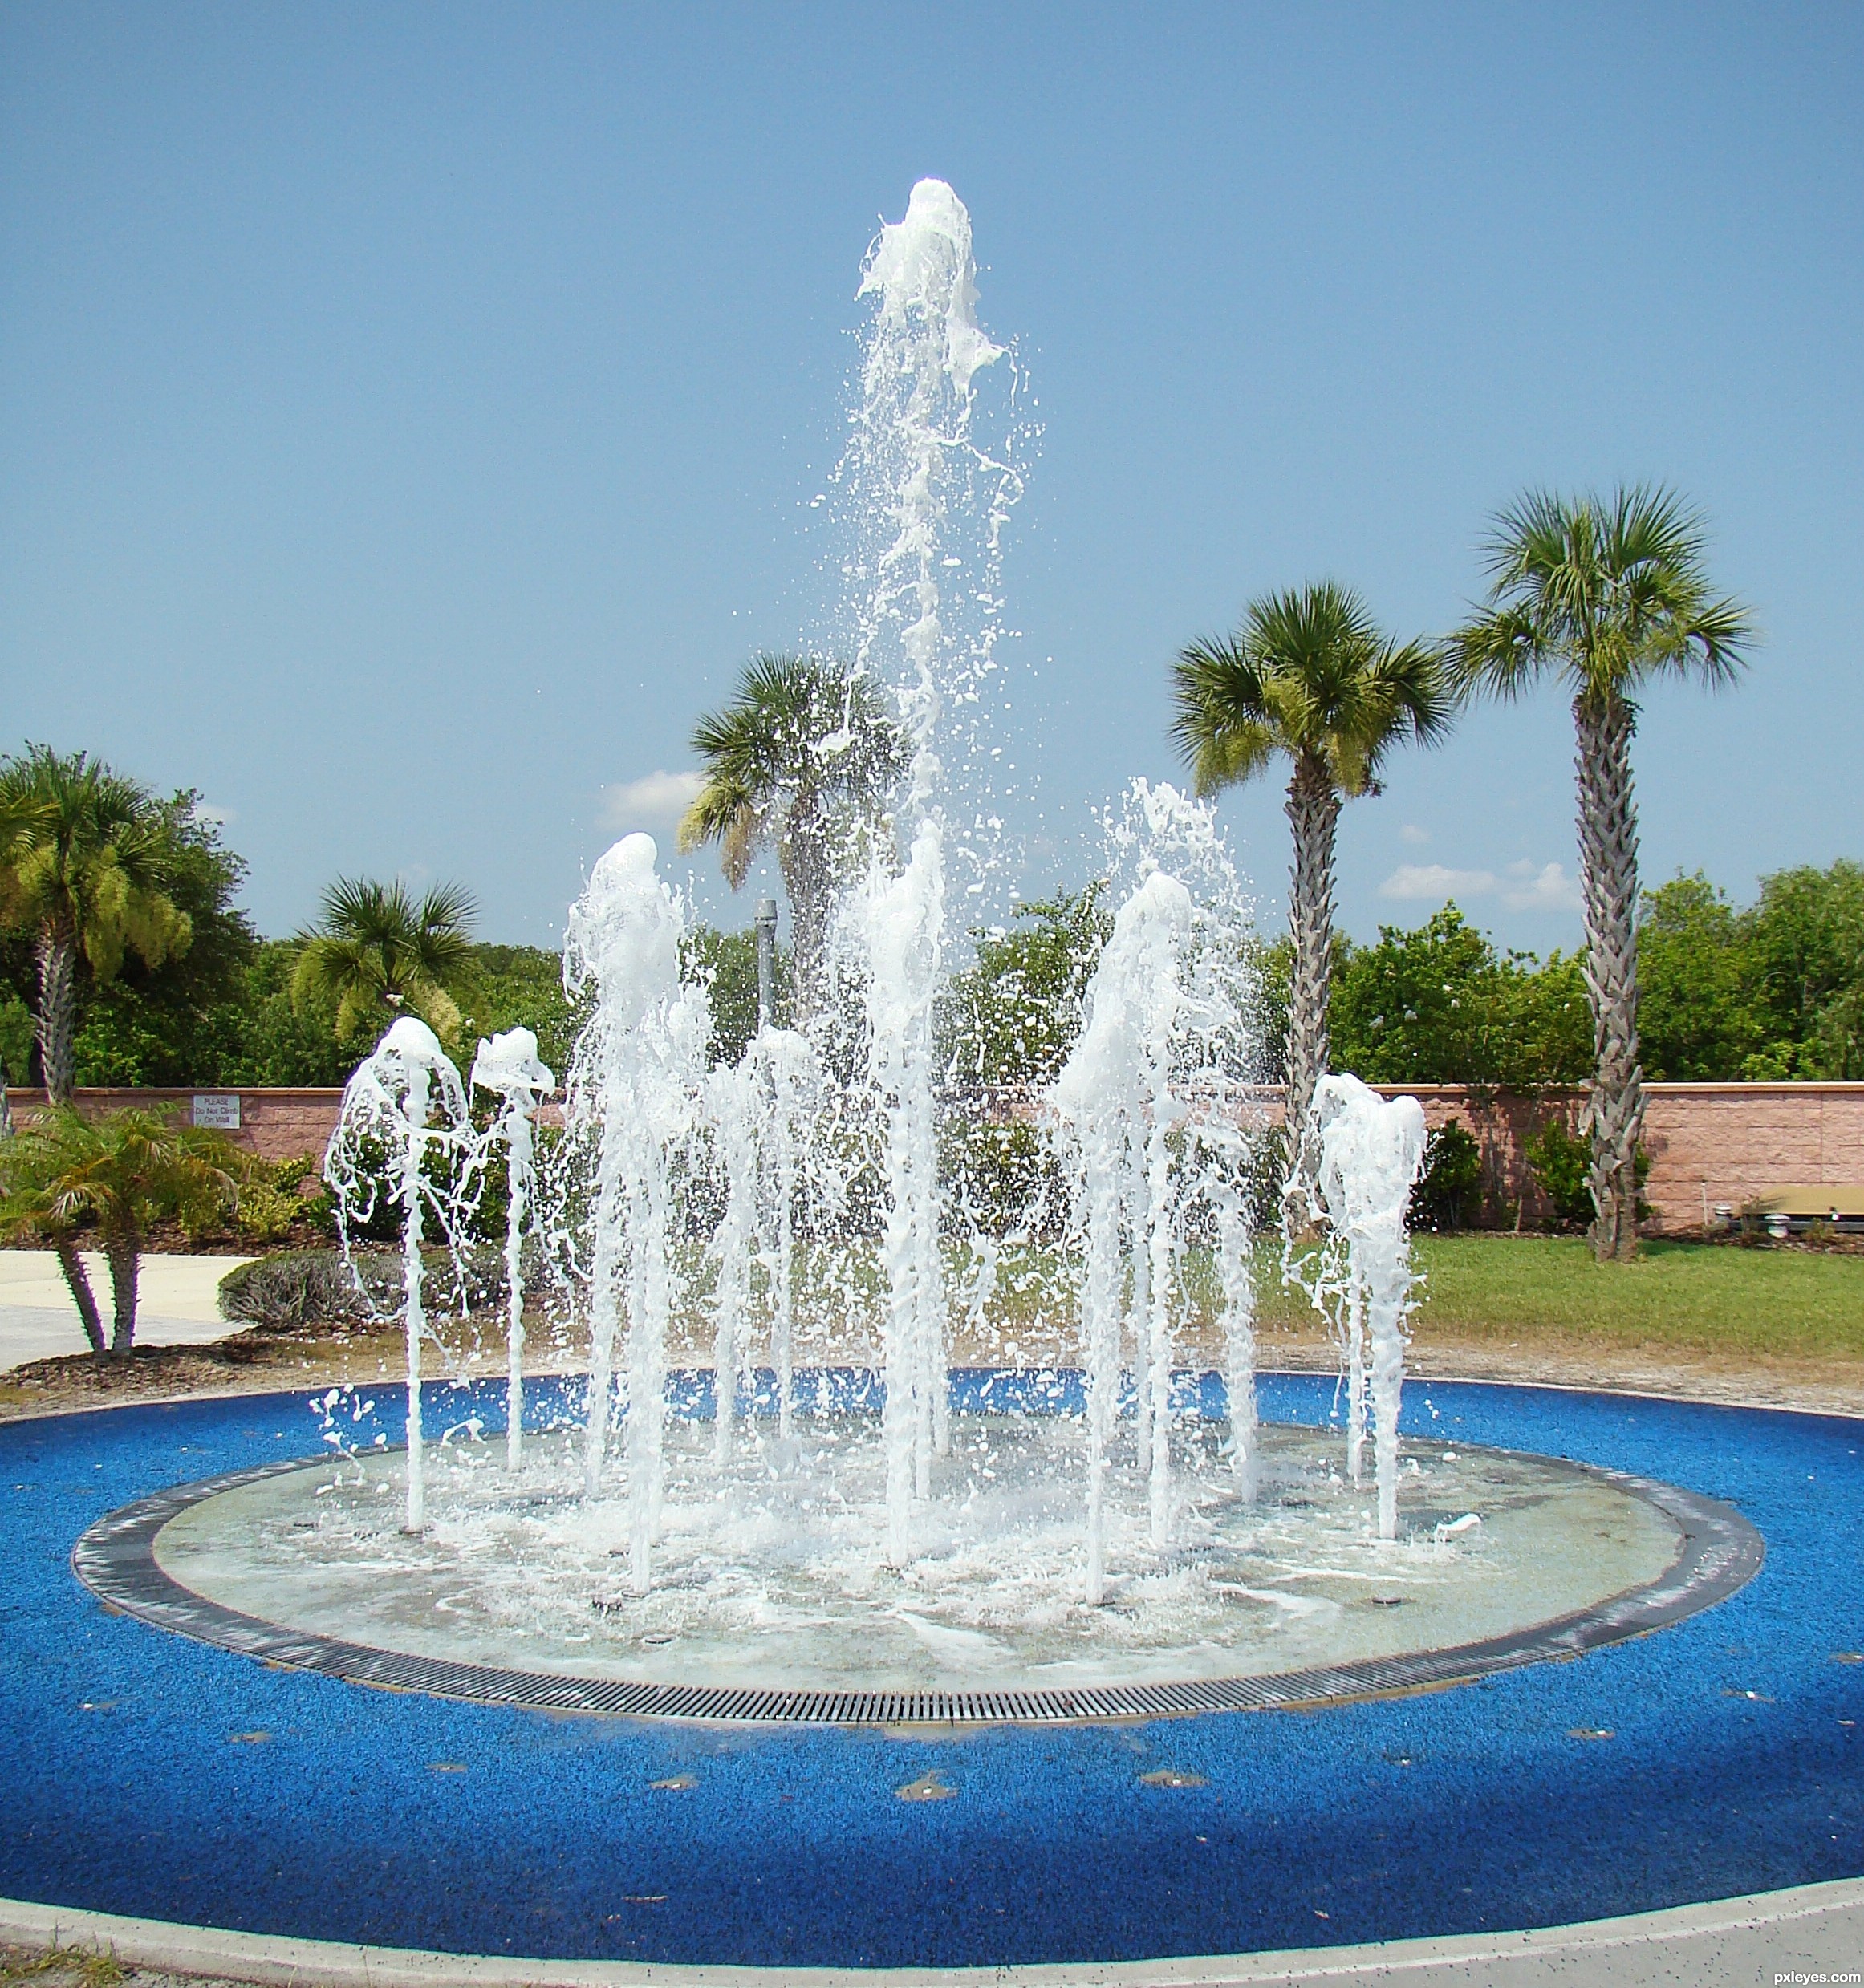 Dancing Water picture, by poetress59 for: water fountains 2 ...